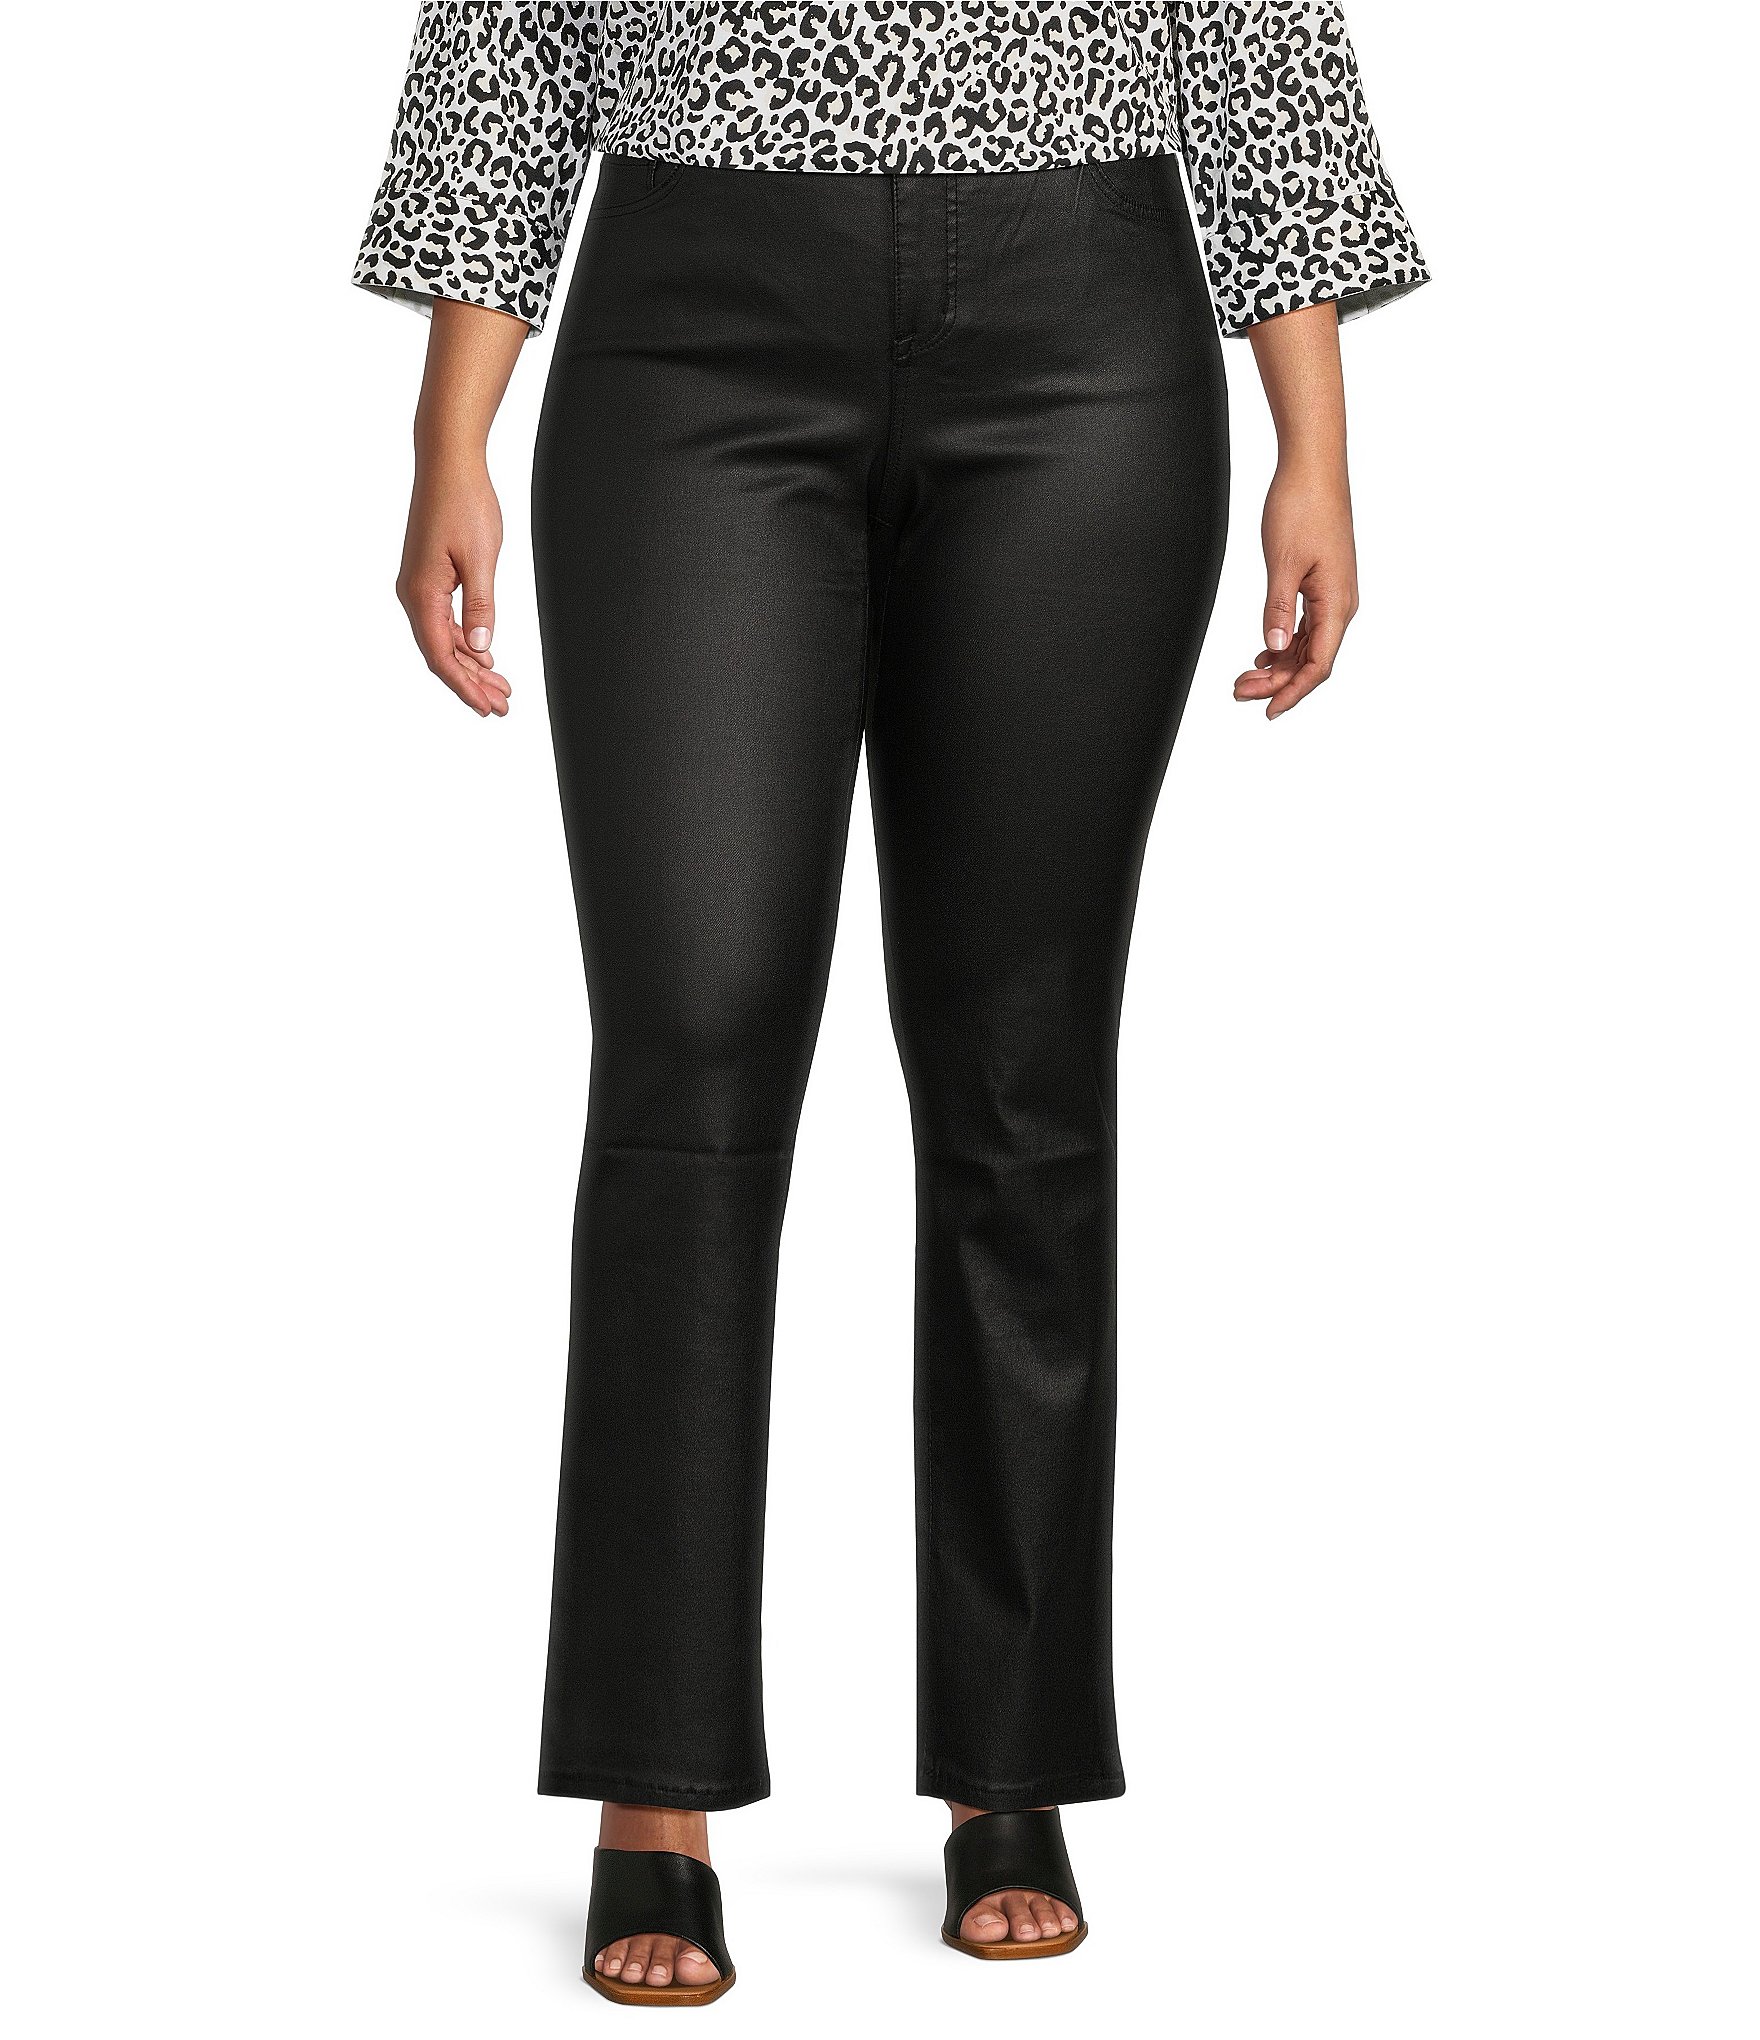 high waisted pants: Women's Plus Size Clothing